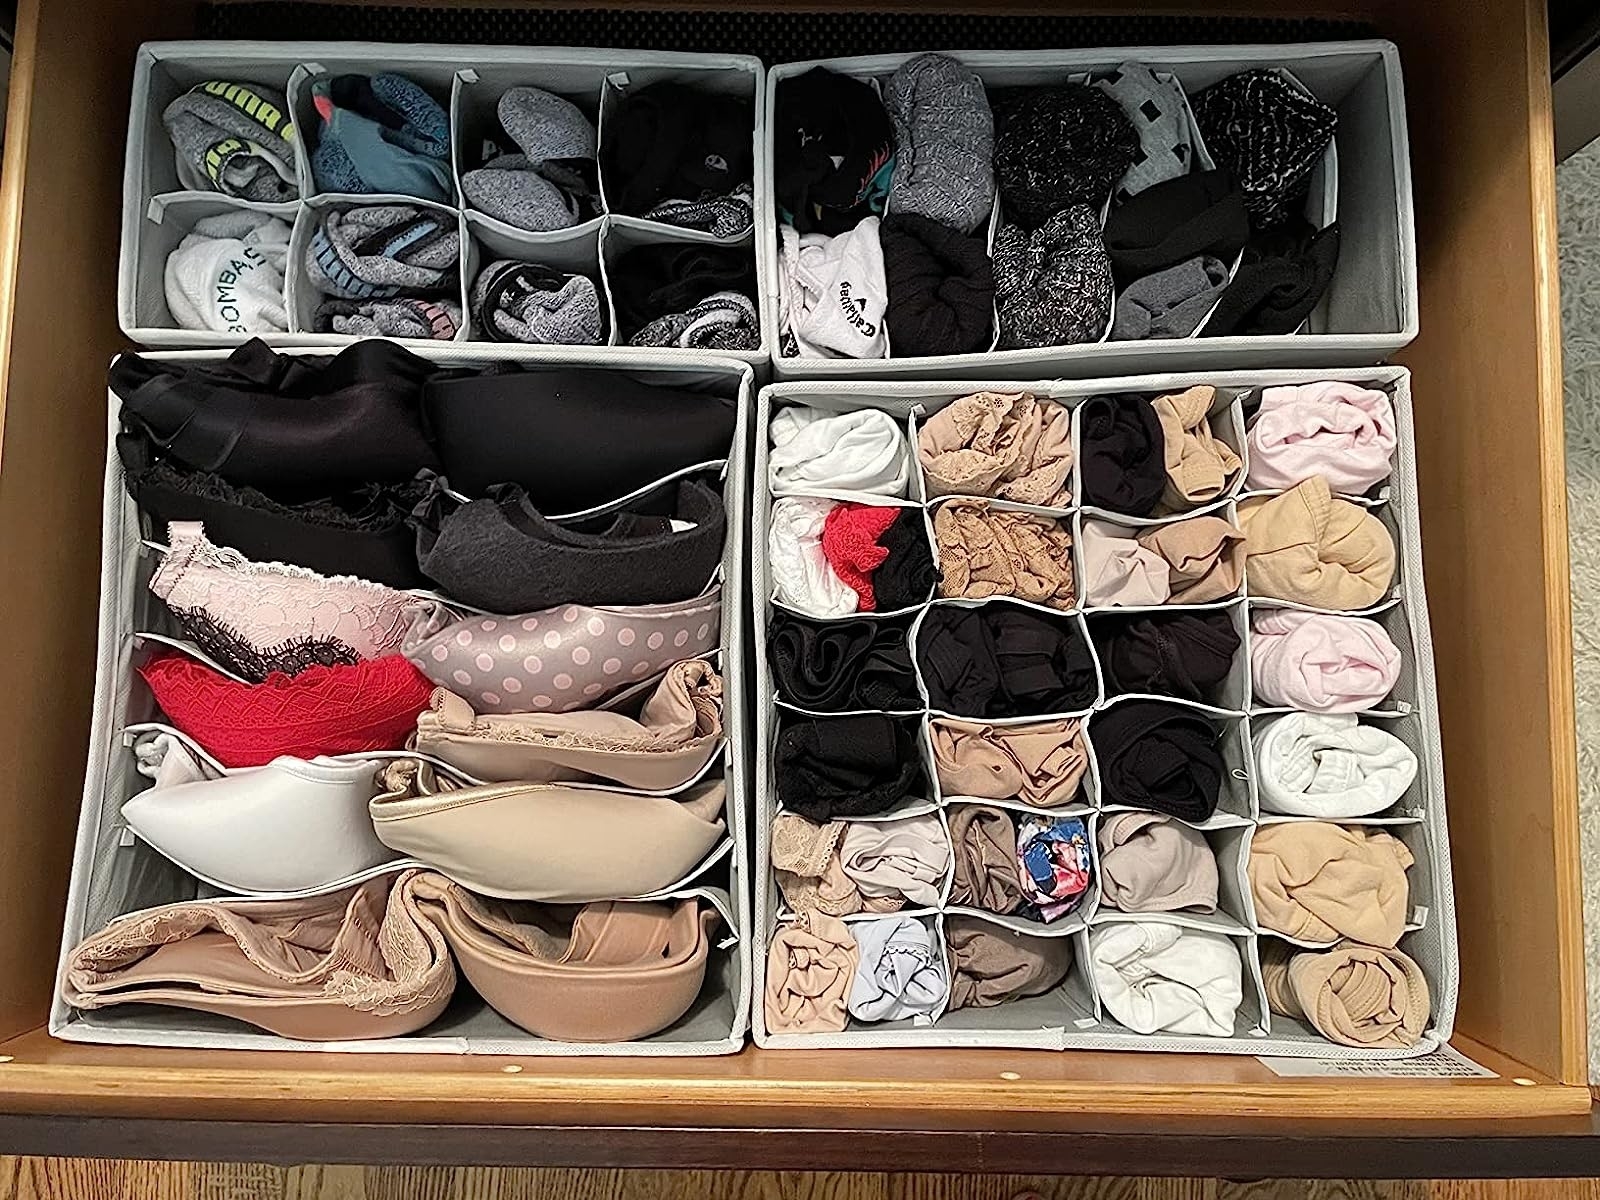 Reviewer image of underwear and socks in the organizers in their dresser drawer